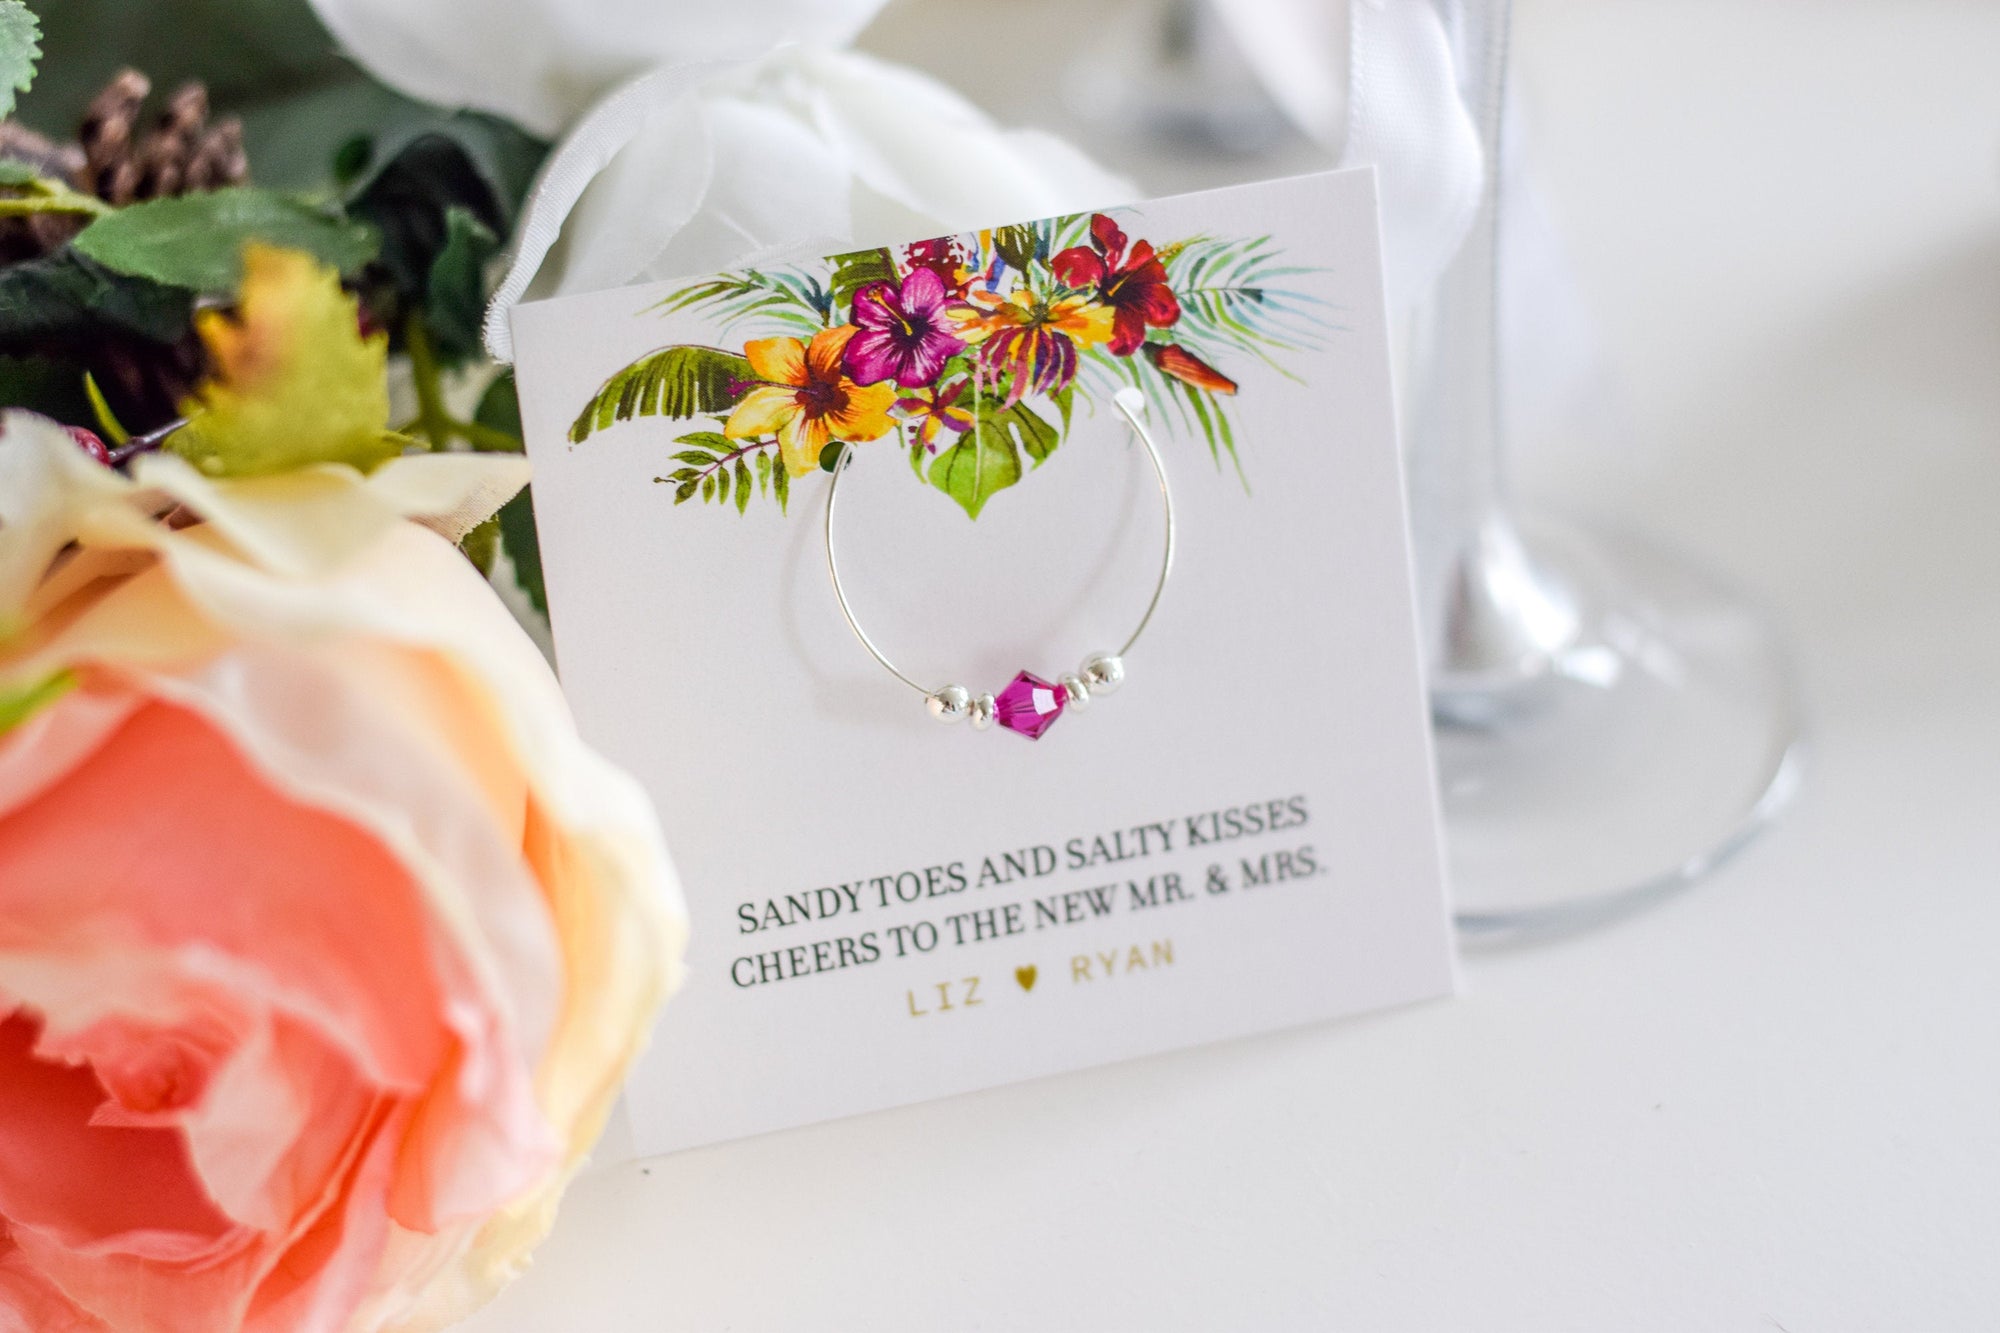 Destination Wedding Favors for Guests, Beach Wedding Favors Travel, Tropical Wedding Party Favors for Adults, Swarovski Crystal Wine Charms - @PlumPolkaDot 